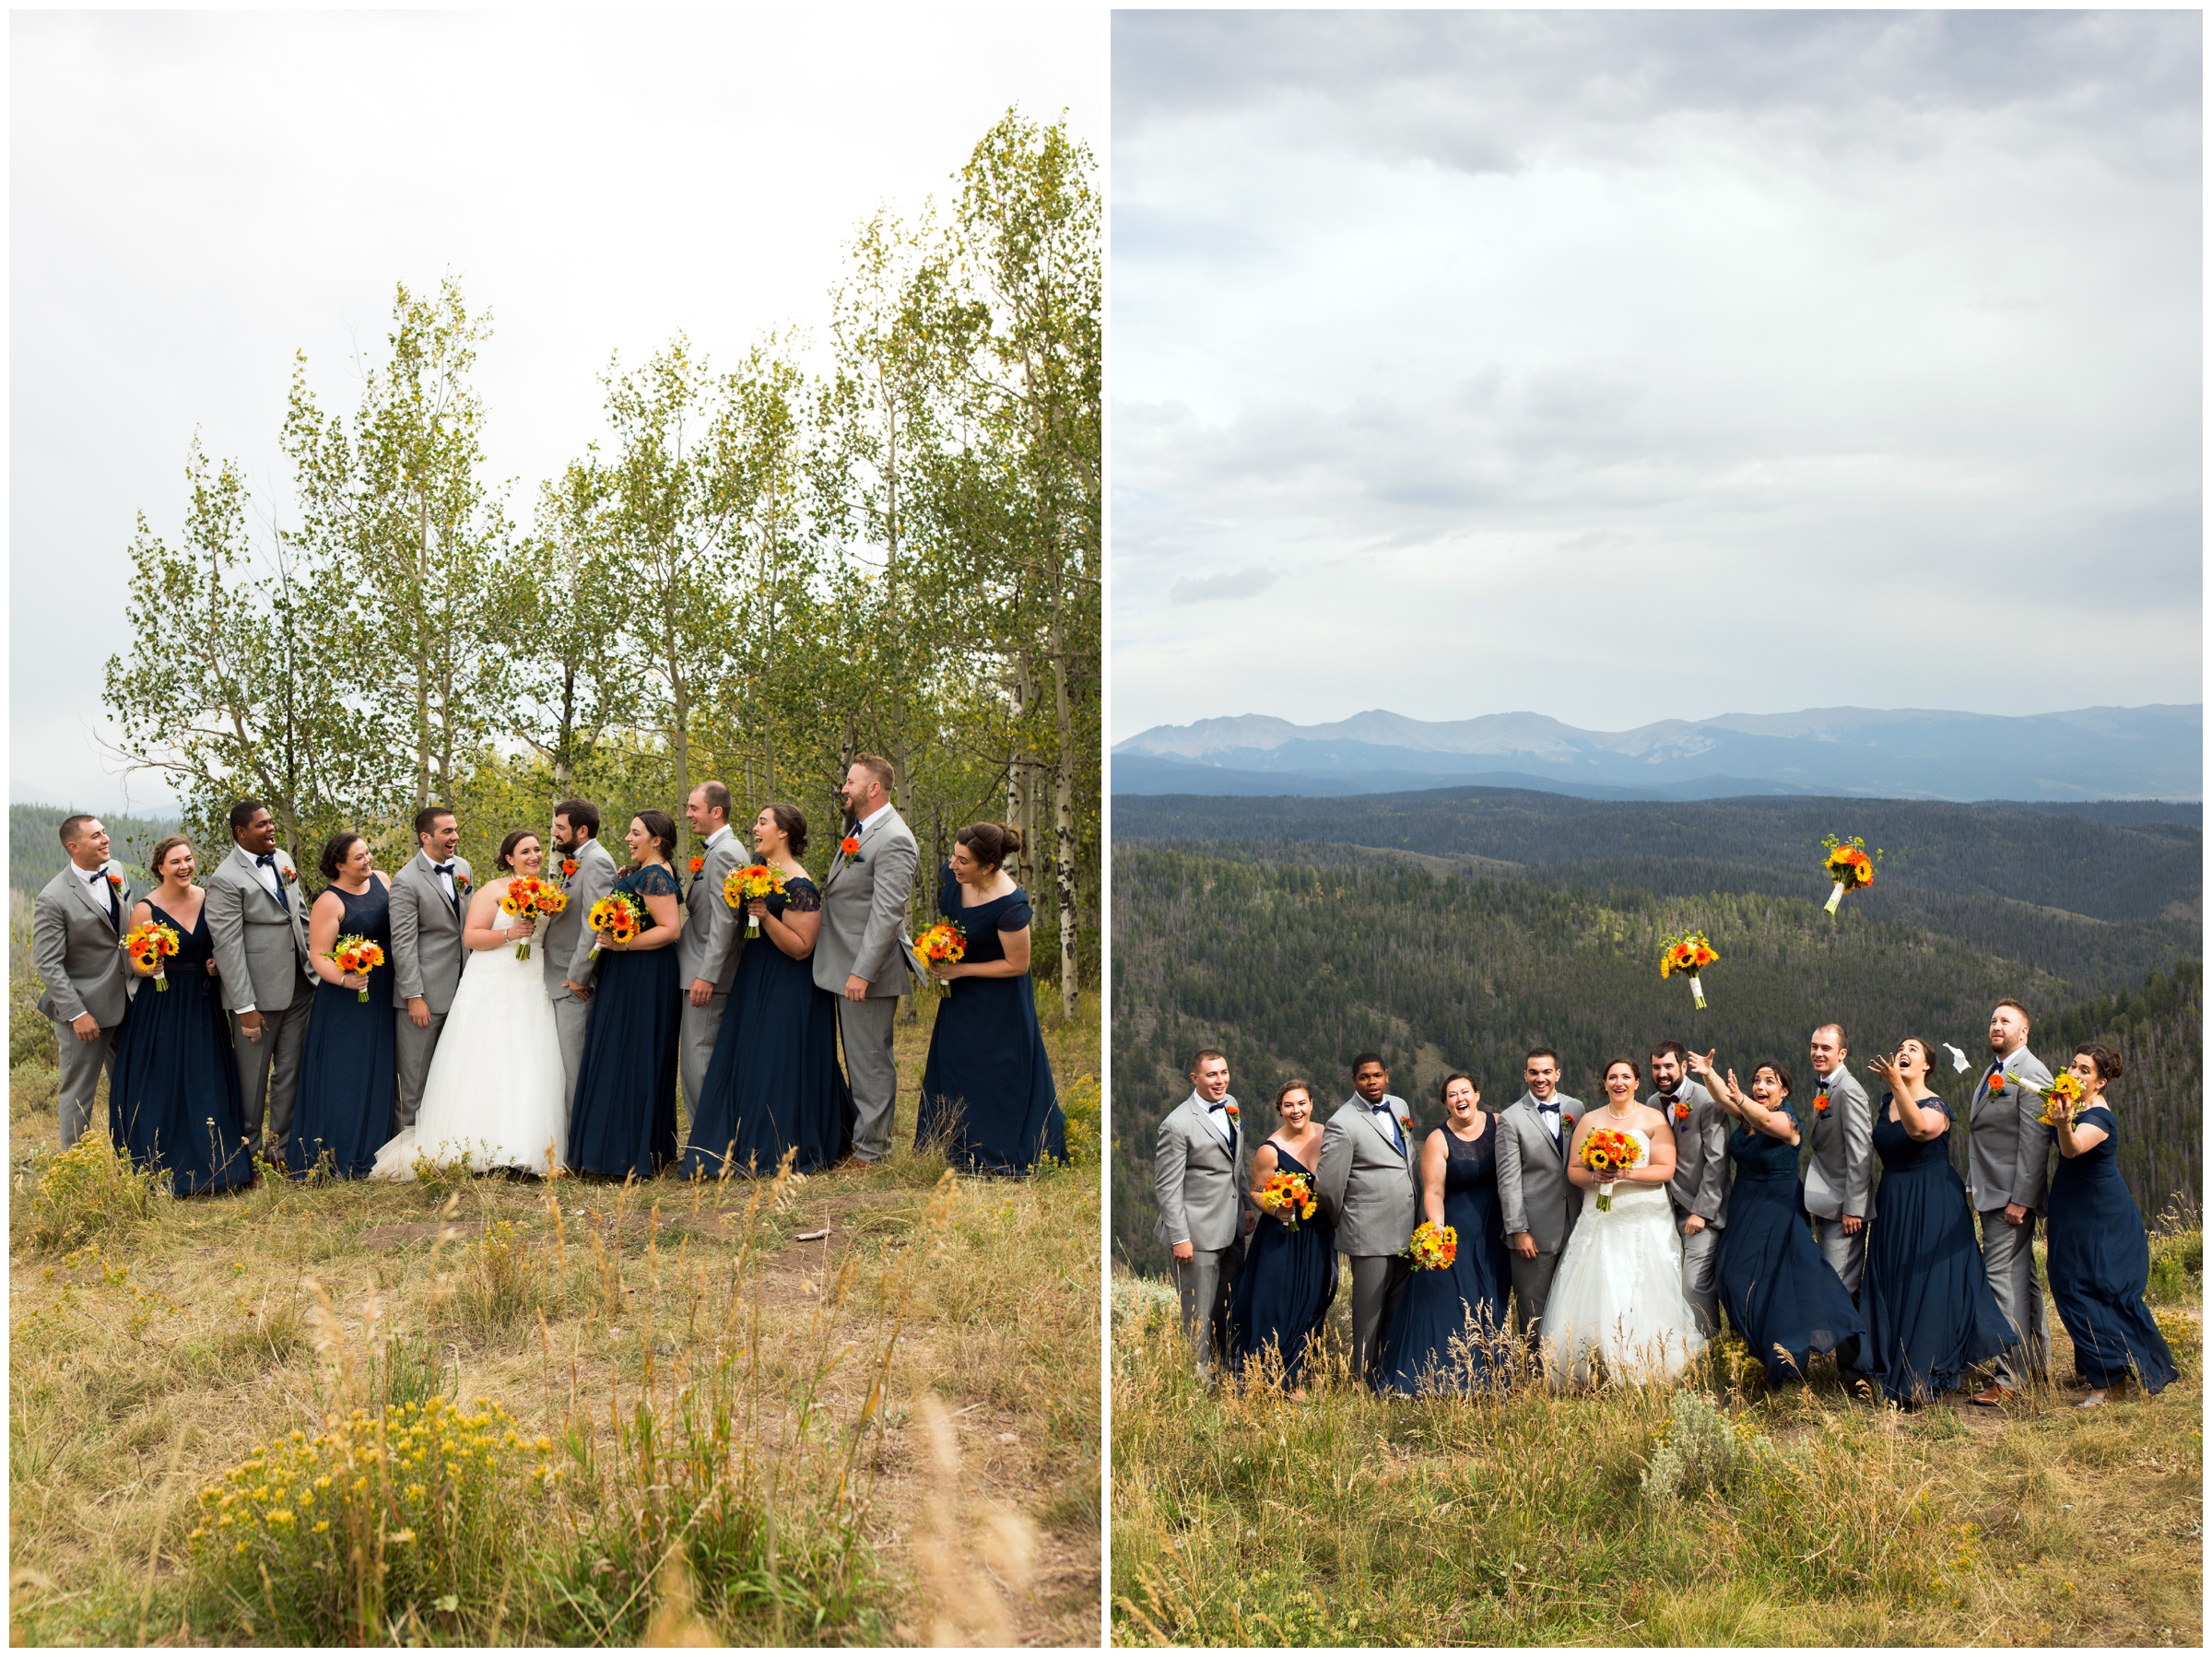 wedding party tossing bouquets in air at Colorado mountain wedding 